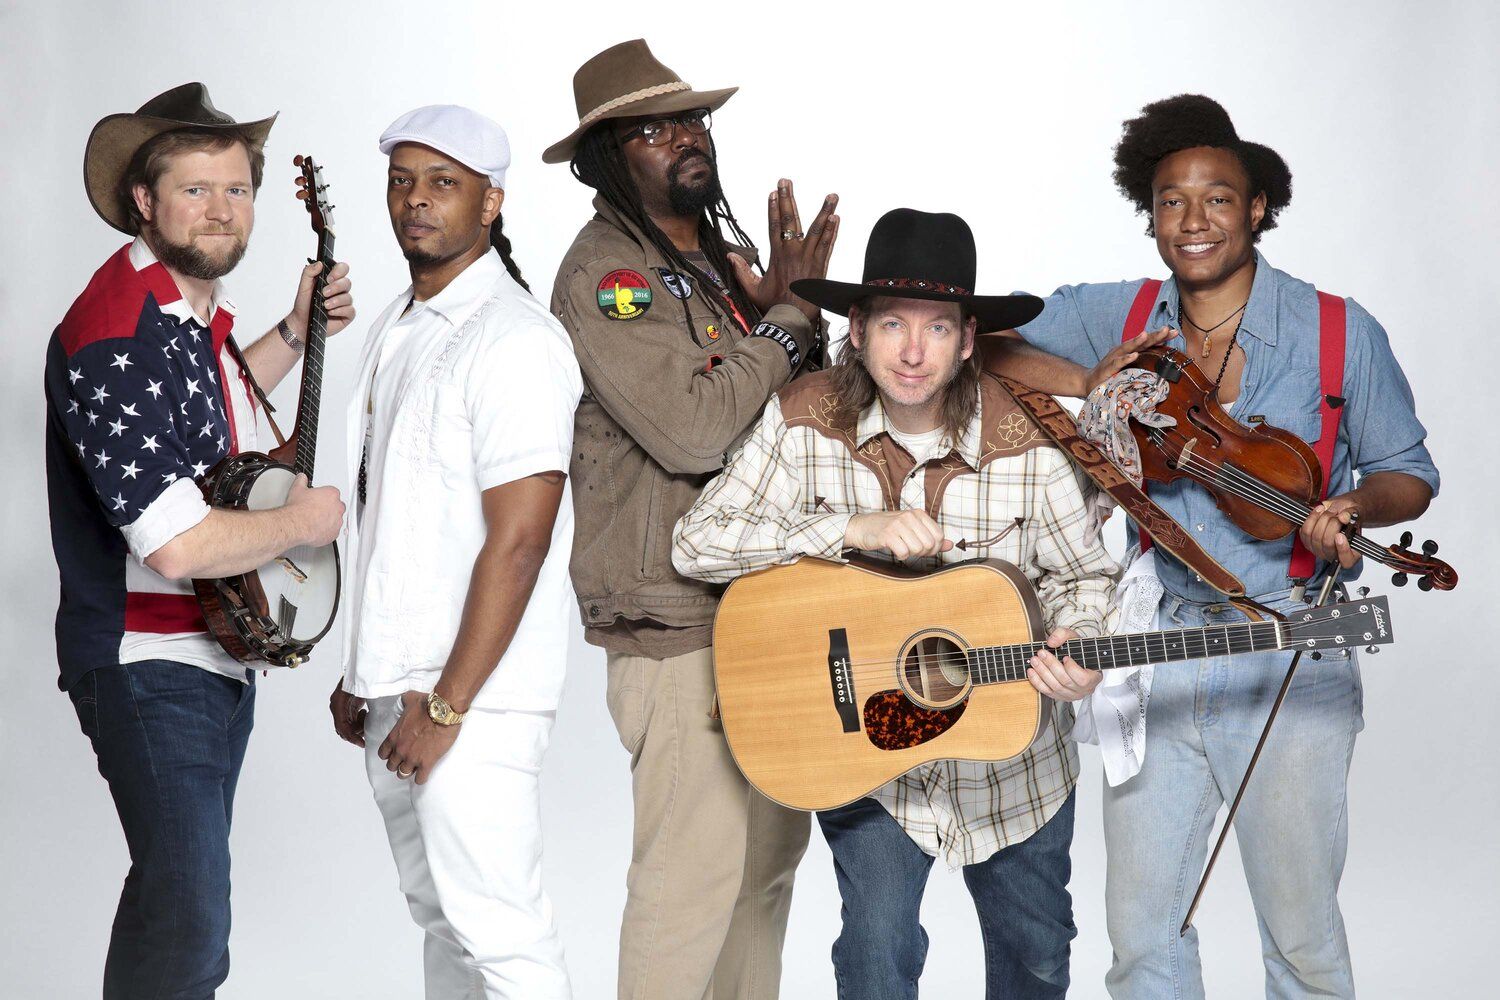 Randy Green with his music group Gangstagrass